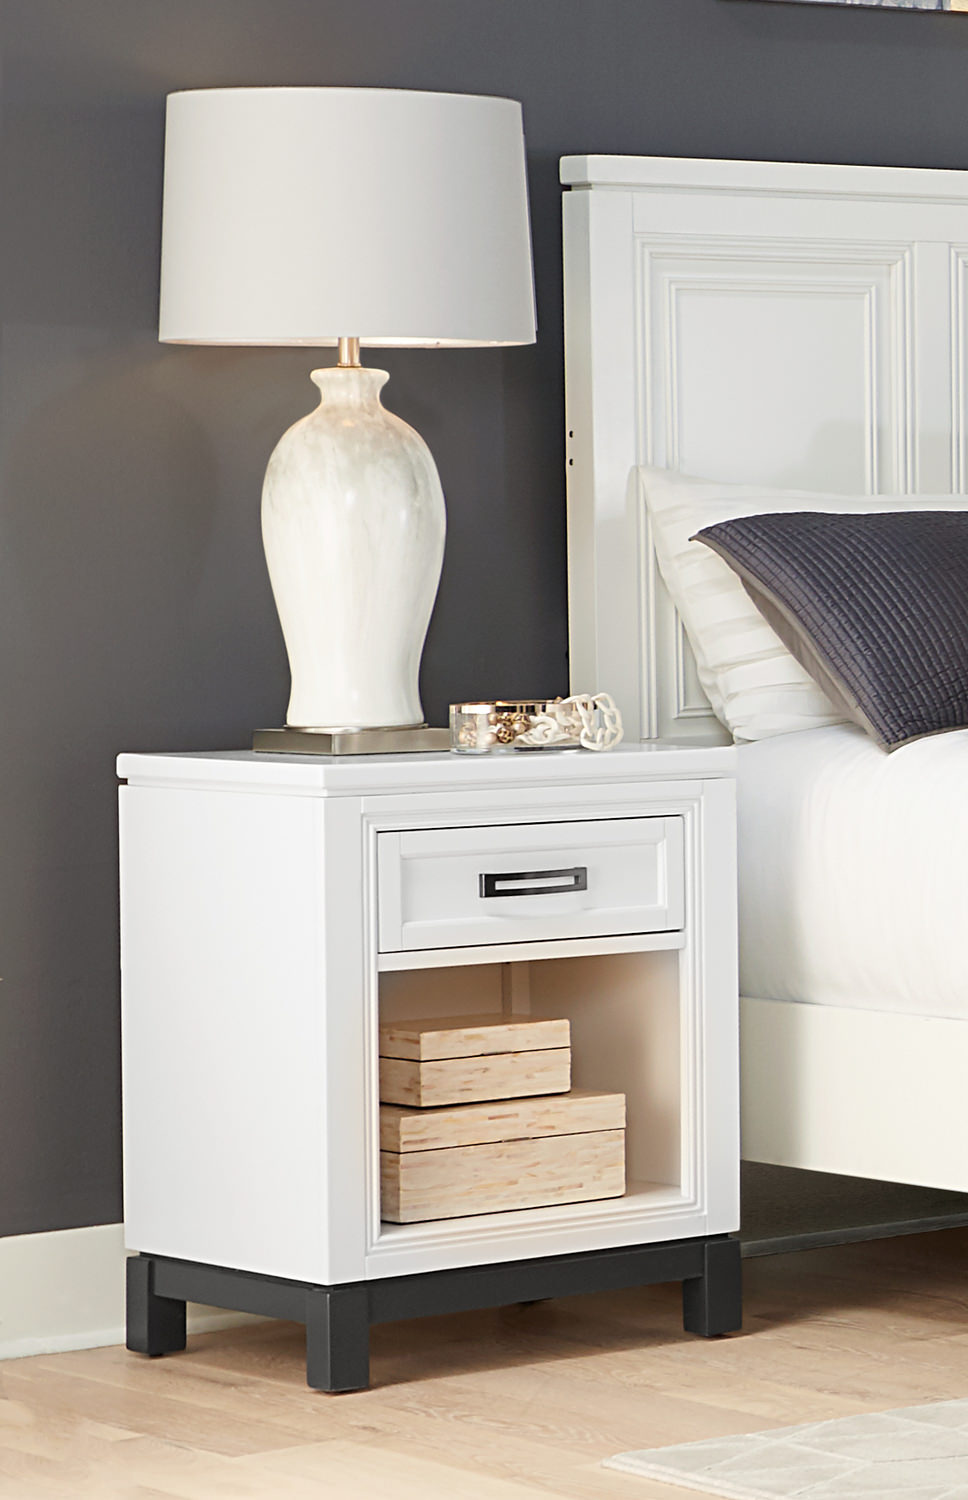 Central Park 1 Drawer Nightstand